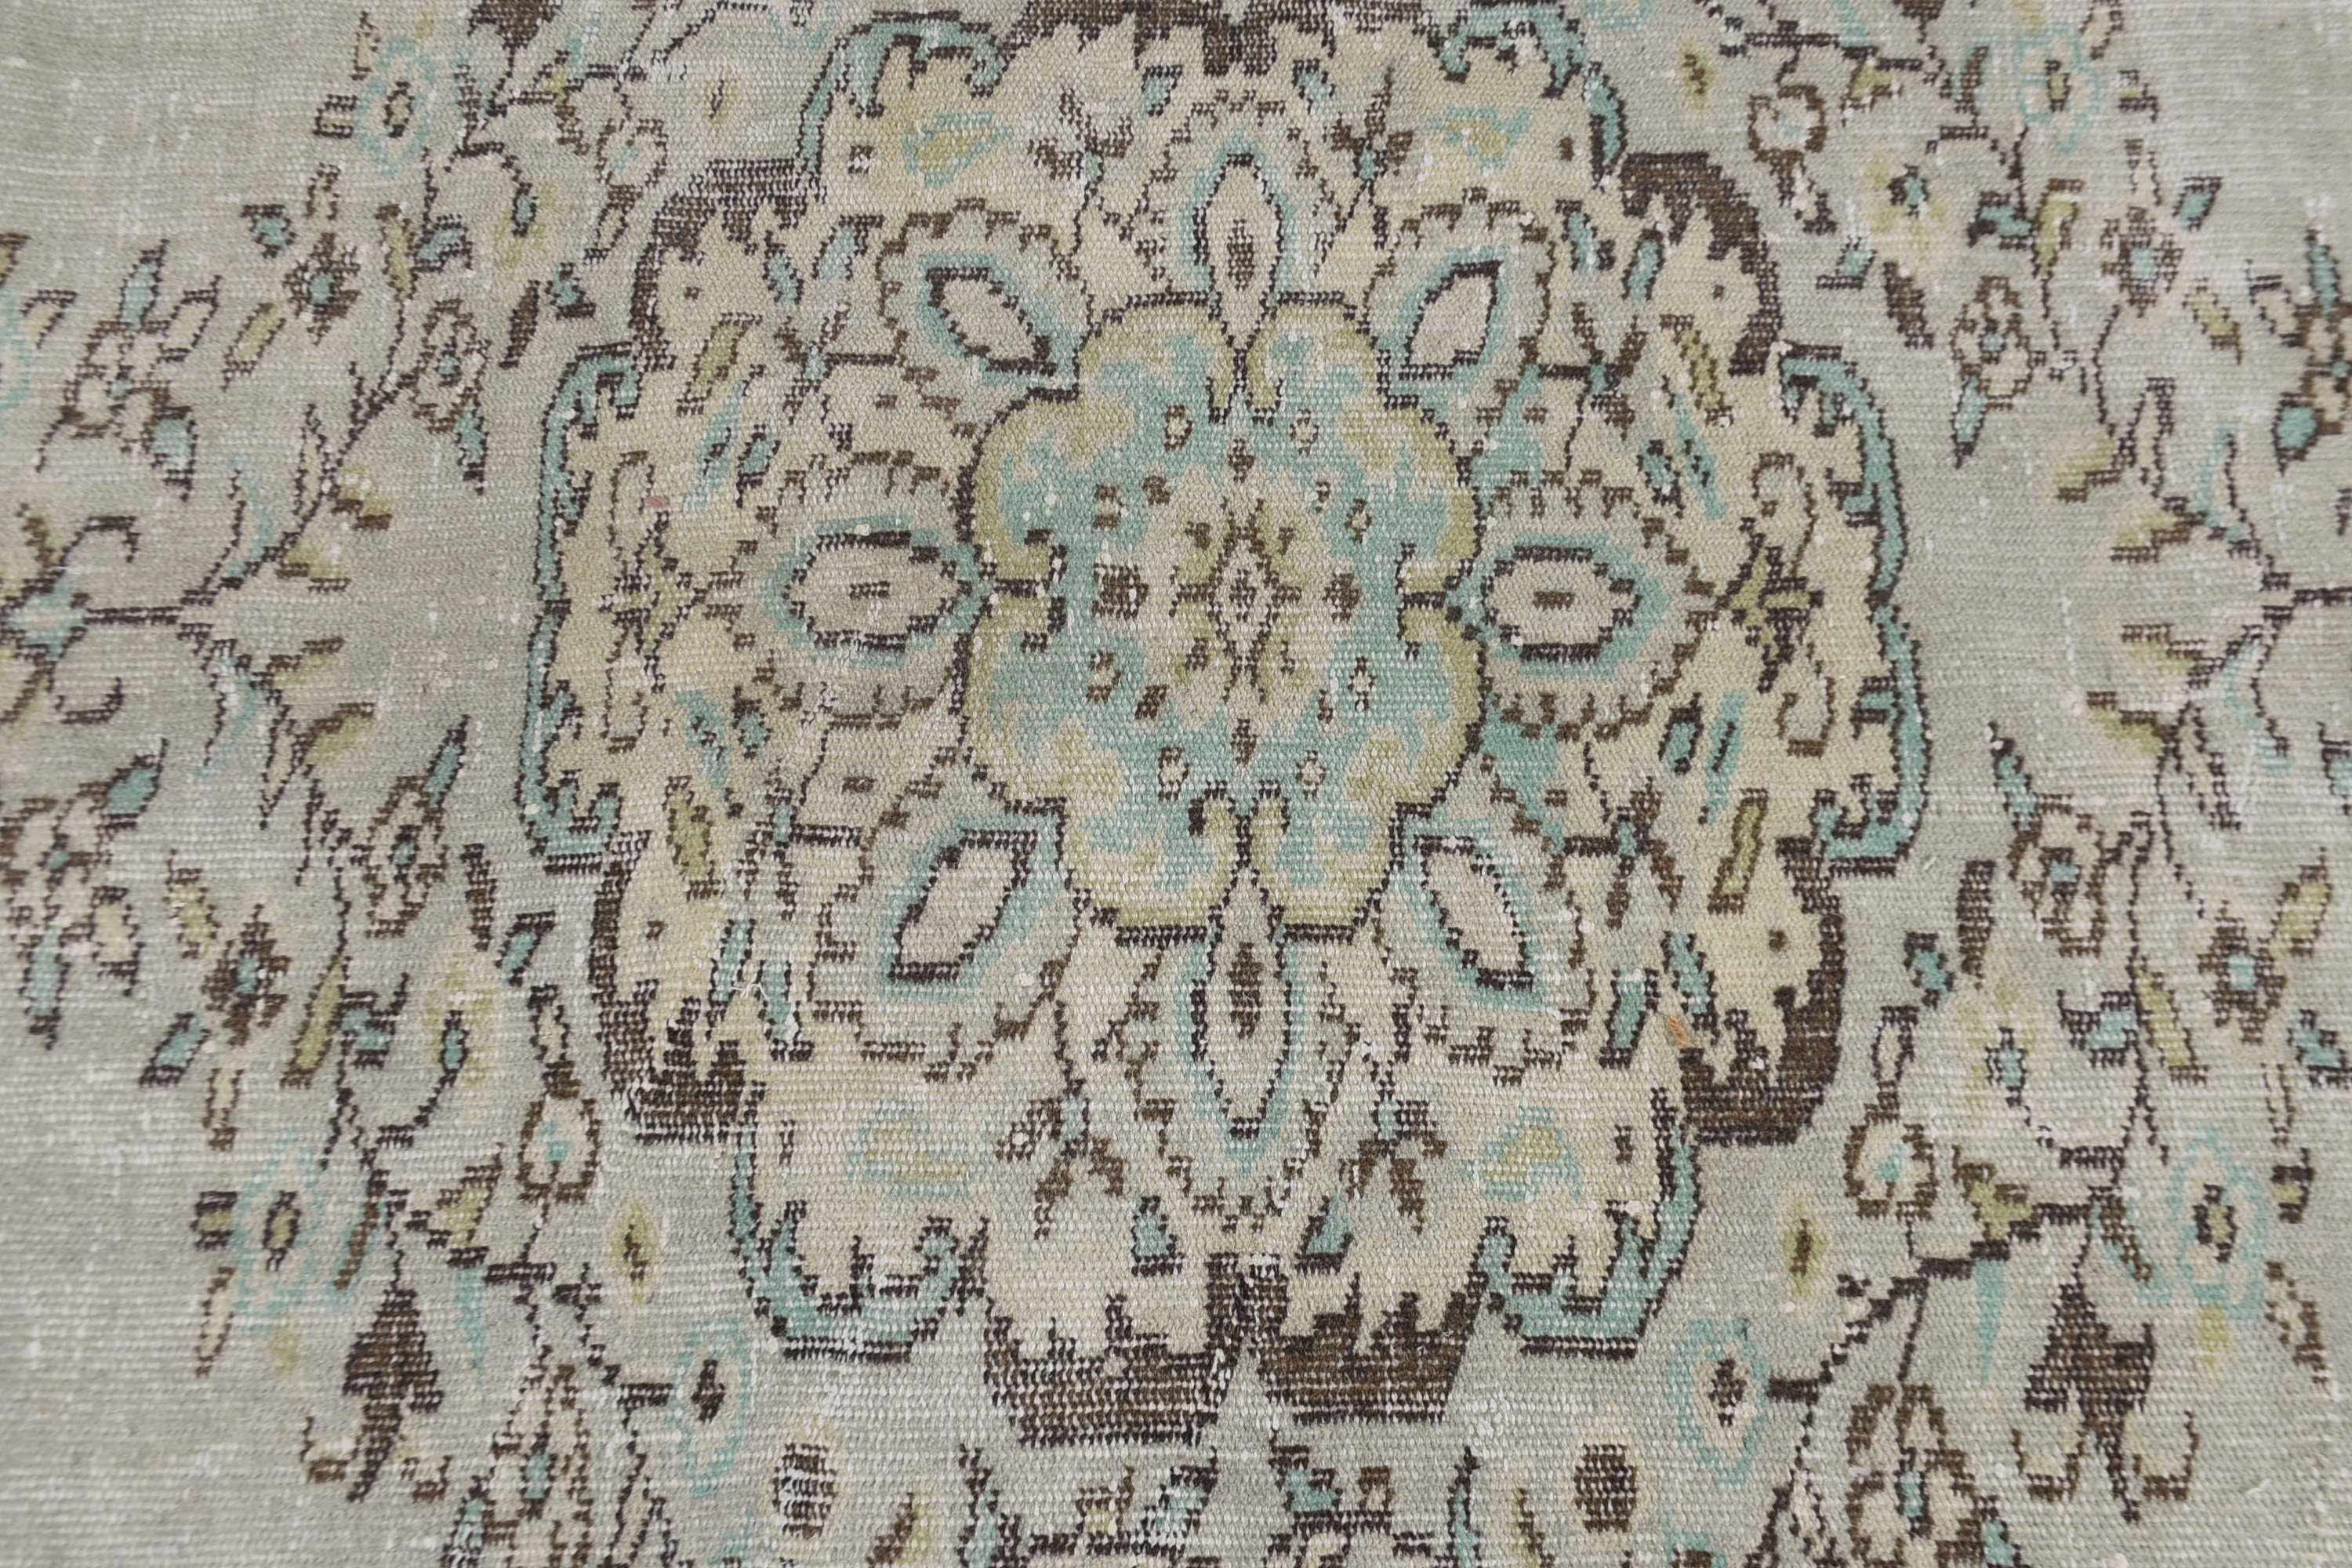 Rugs for Salon, Salon Rug, Green Moroccan Rug, Anatolian Rug, Turkish Rugs, Vintage Rugs, Bedroom Rugs, 5.4x8.6 ft Large Rugs, Antique Rug